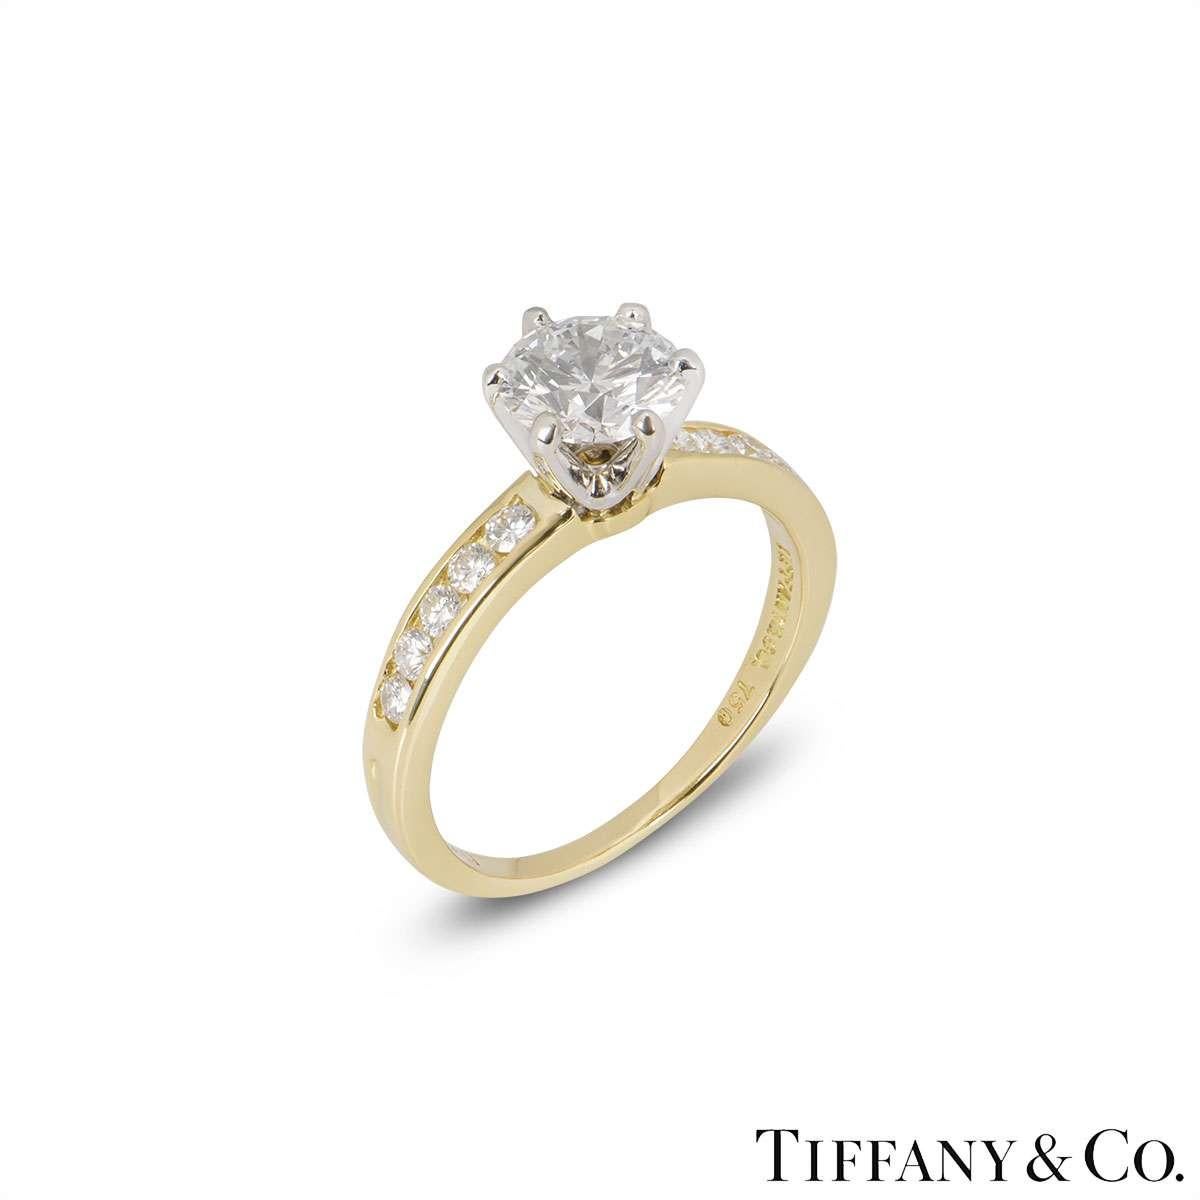 A stunning 18k yellow gold diamond ring by Tiffany & Co. The ring is set to the centre with a 1.08ct round brilliant cut diamond, H colour and VS1 clarity in a 6 claw setting. The shoulders are set with 10 round brilliant cut diamonds totalling